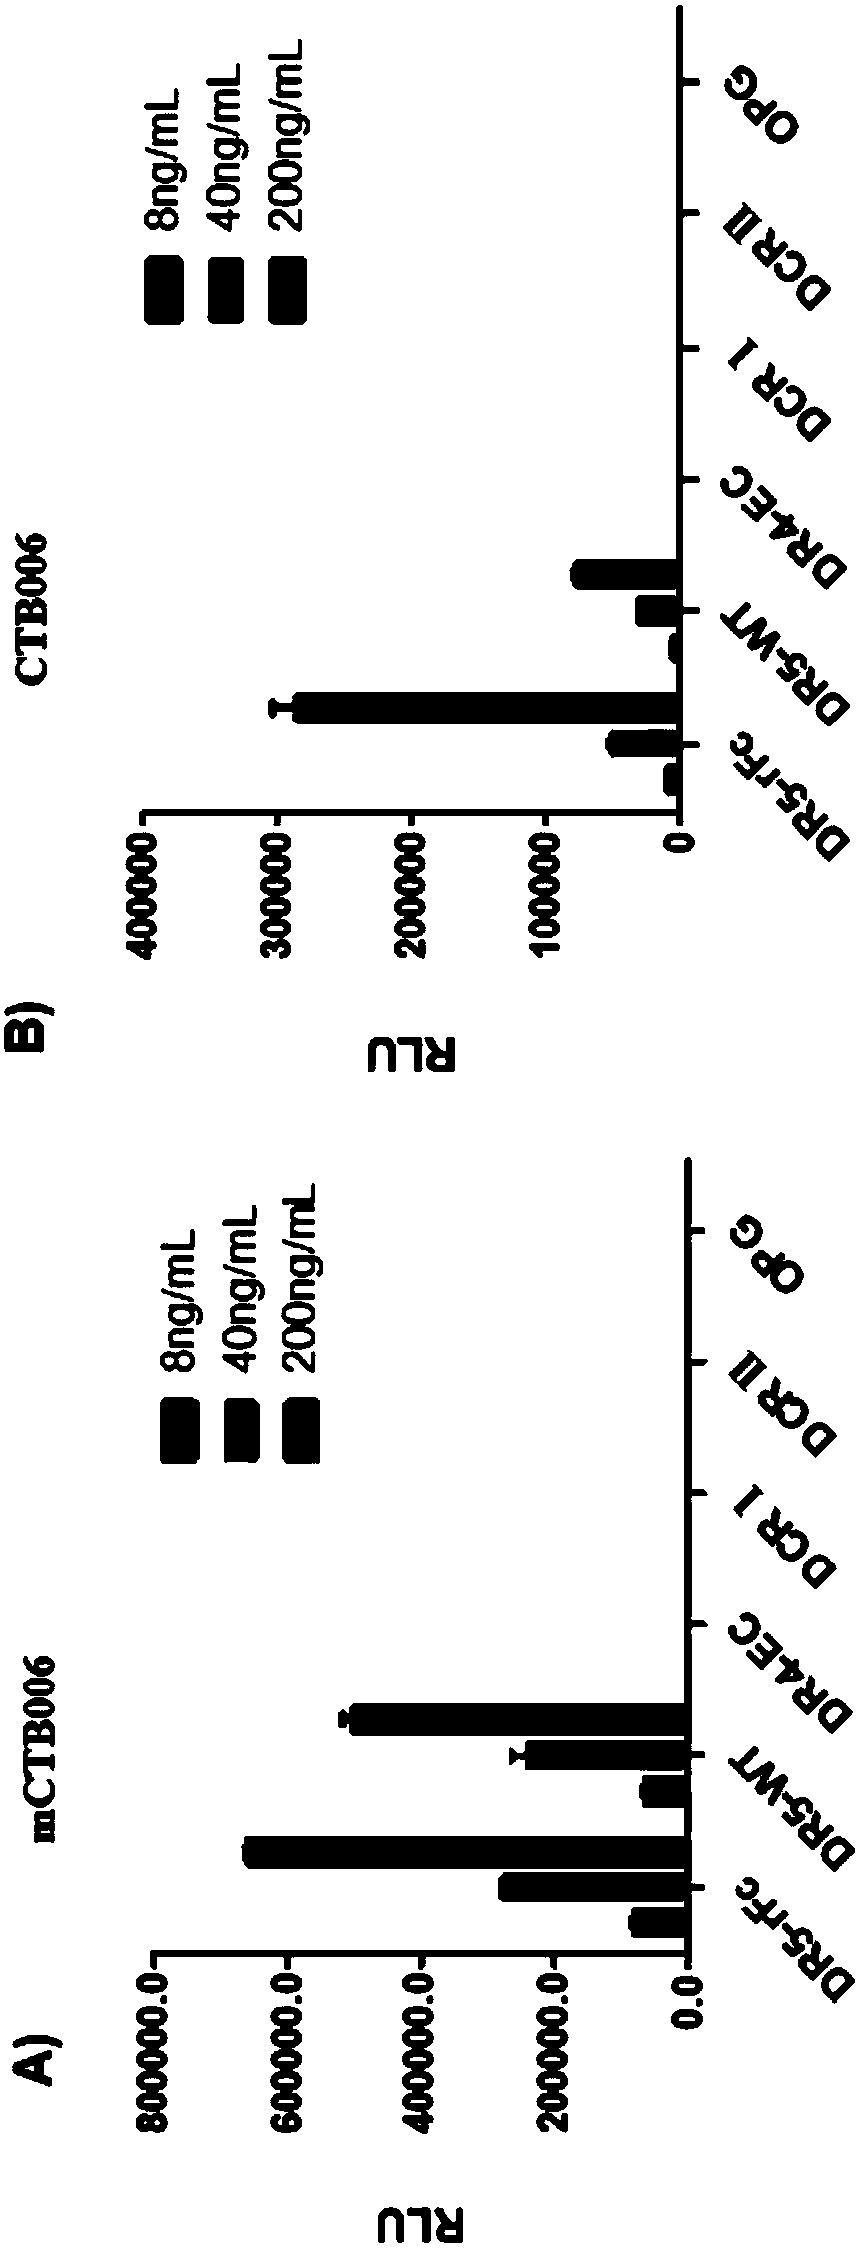 Trail receptor-binding agents and uses of same